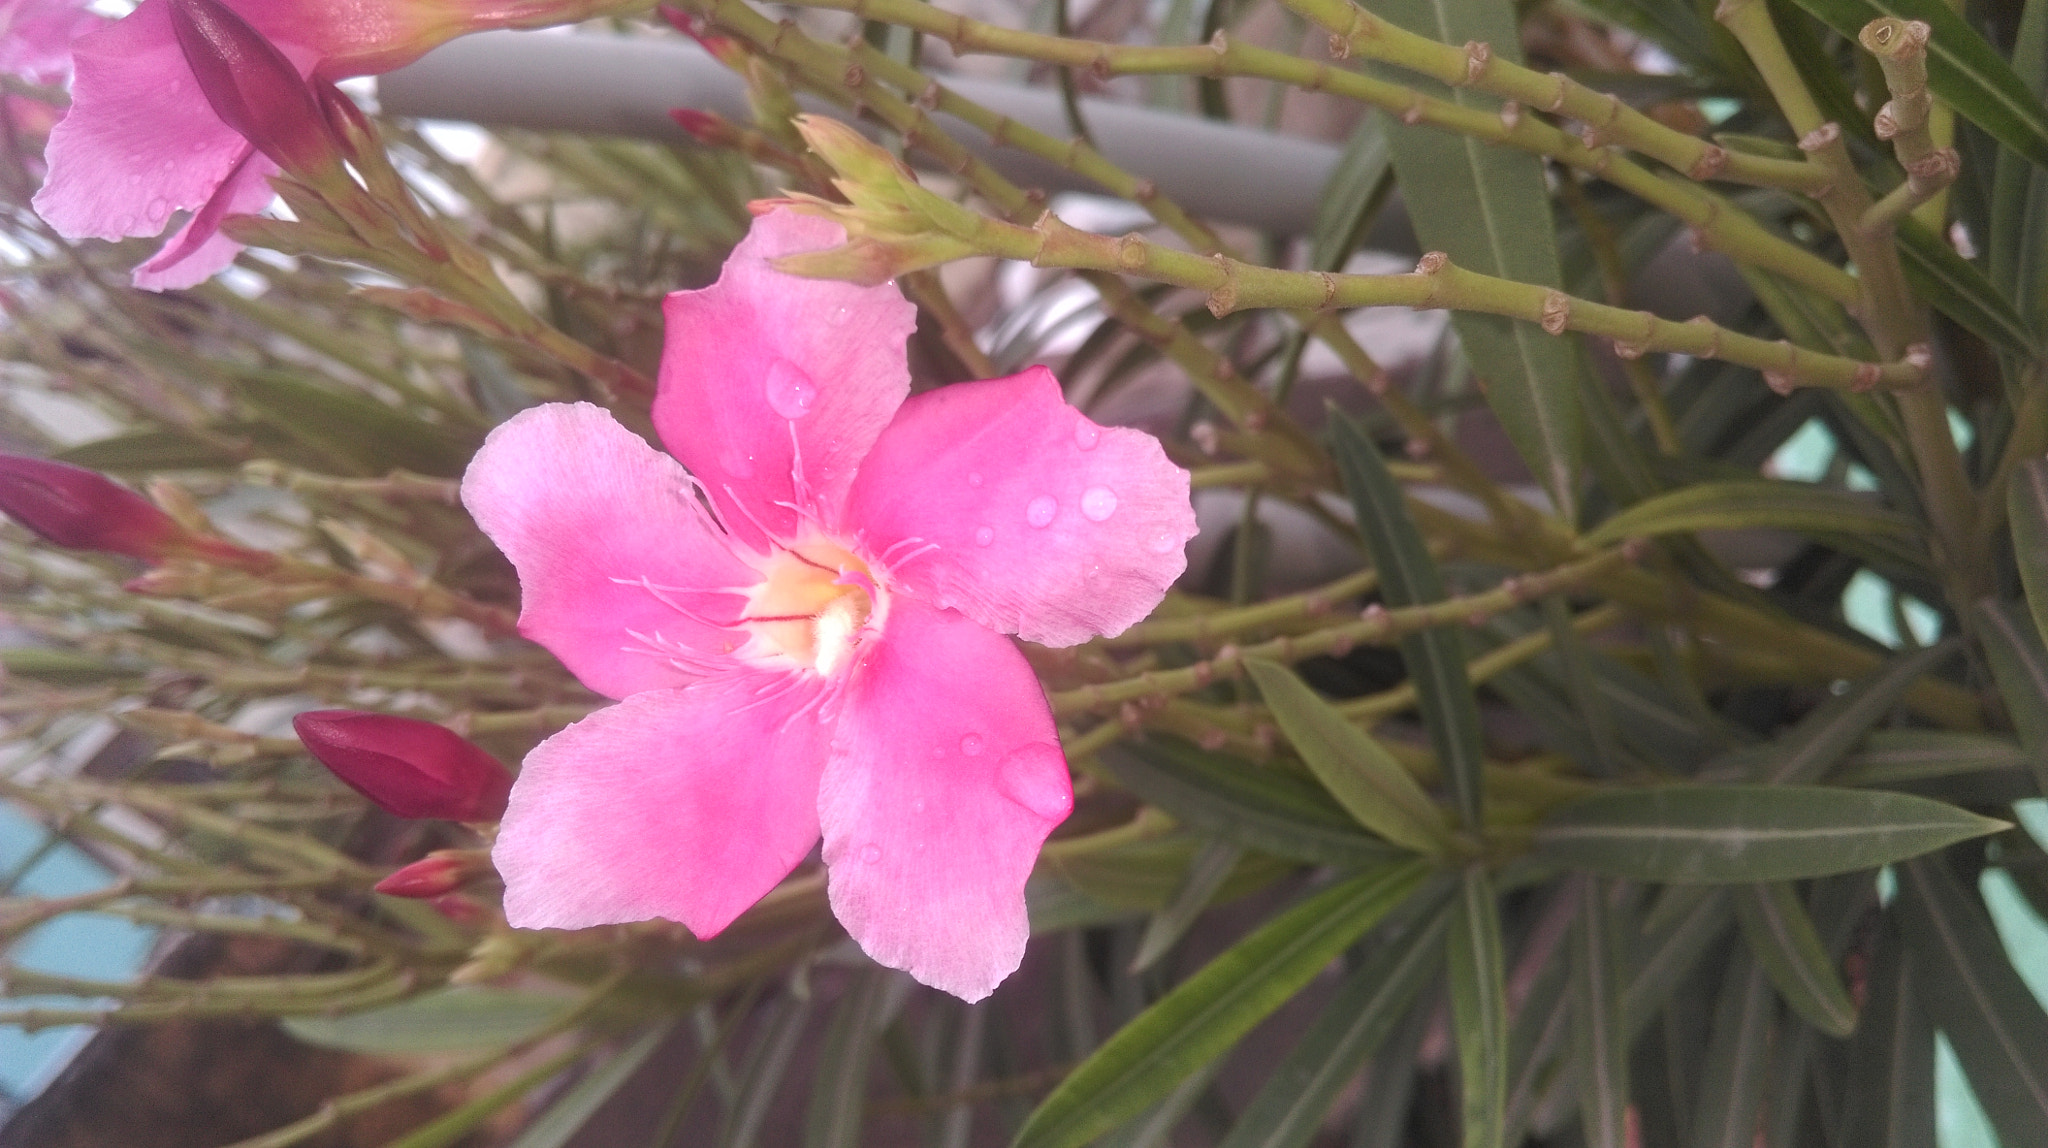 HTC DESIRE 820 DUAL SIM sample photo. Lovely pink flower photography